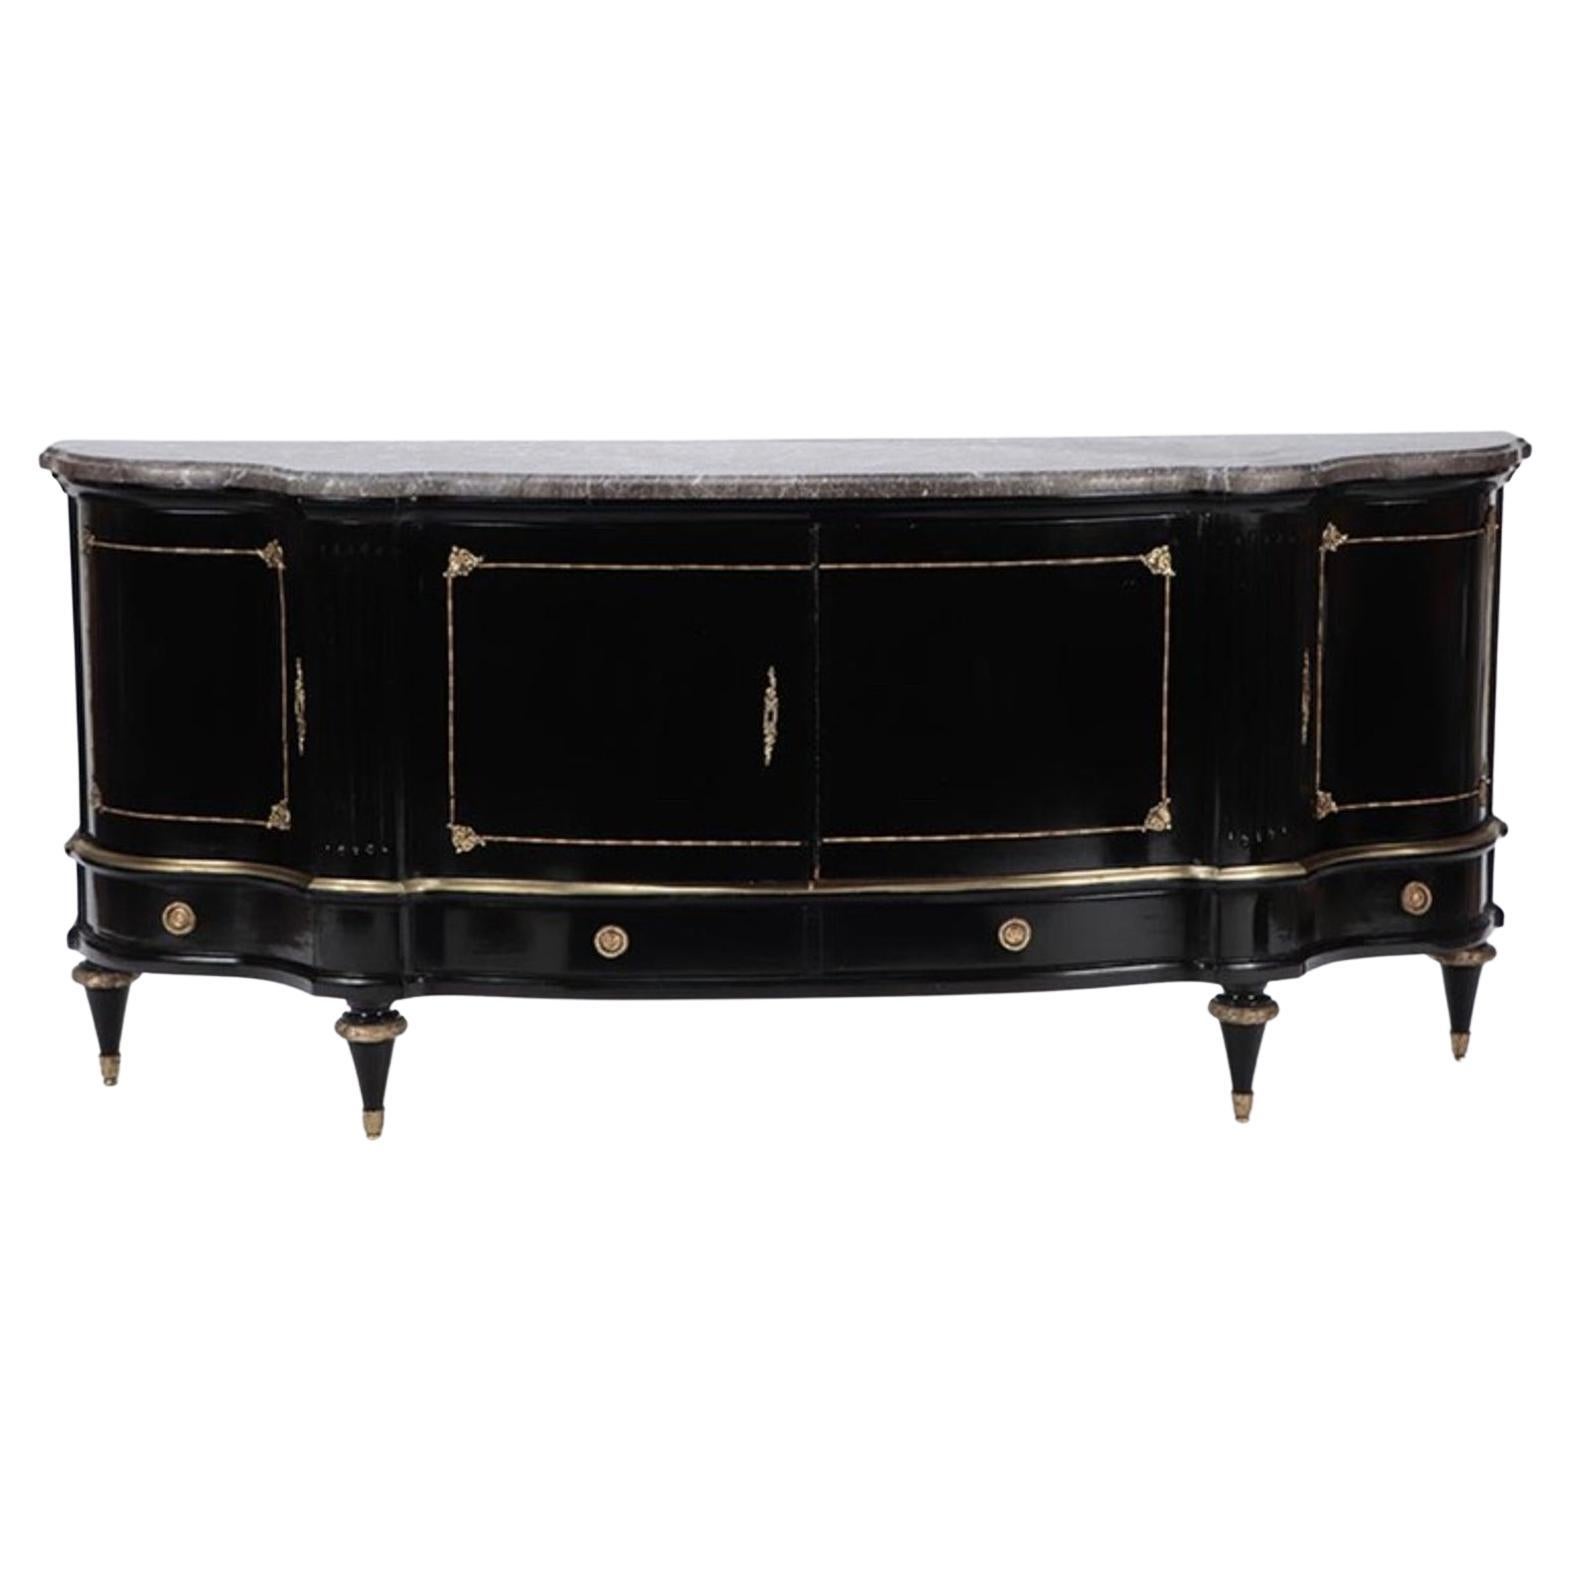 Mid-20th Century Louis XVI Style Ebonized Marble Top Sideboard with Bronze Mount For Sale